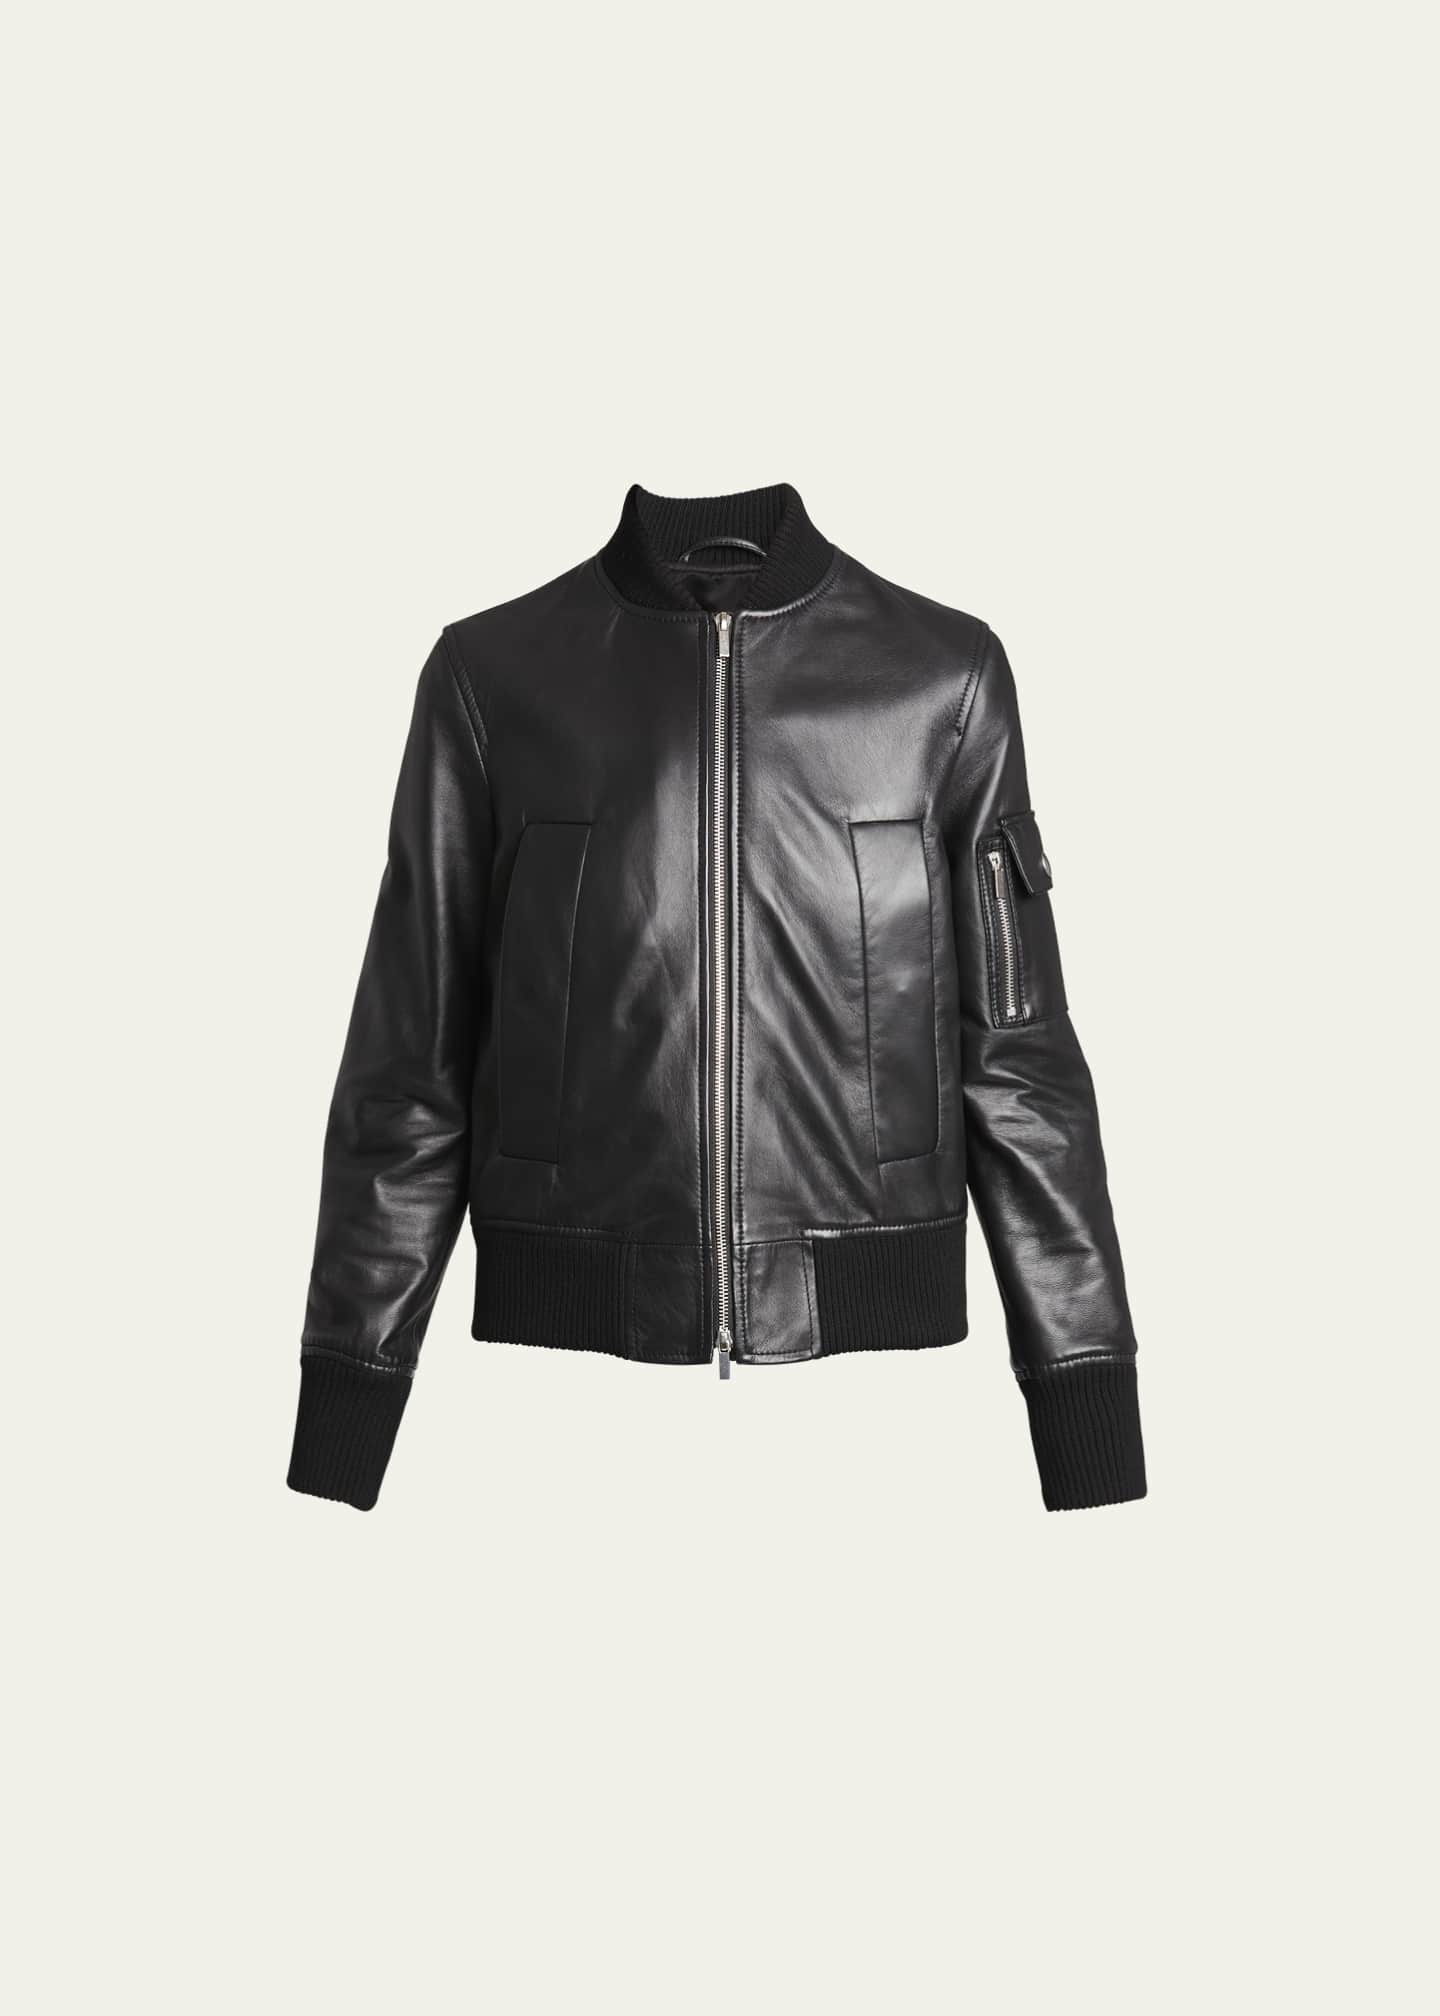 Proenza Schouler White Label Mika Leather Bomber Jacket Image 1 of 5